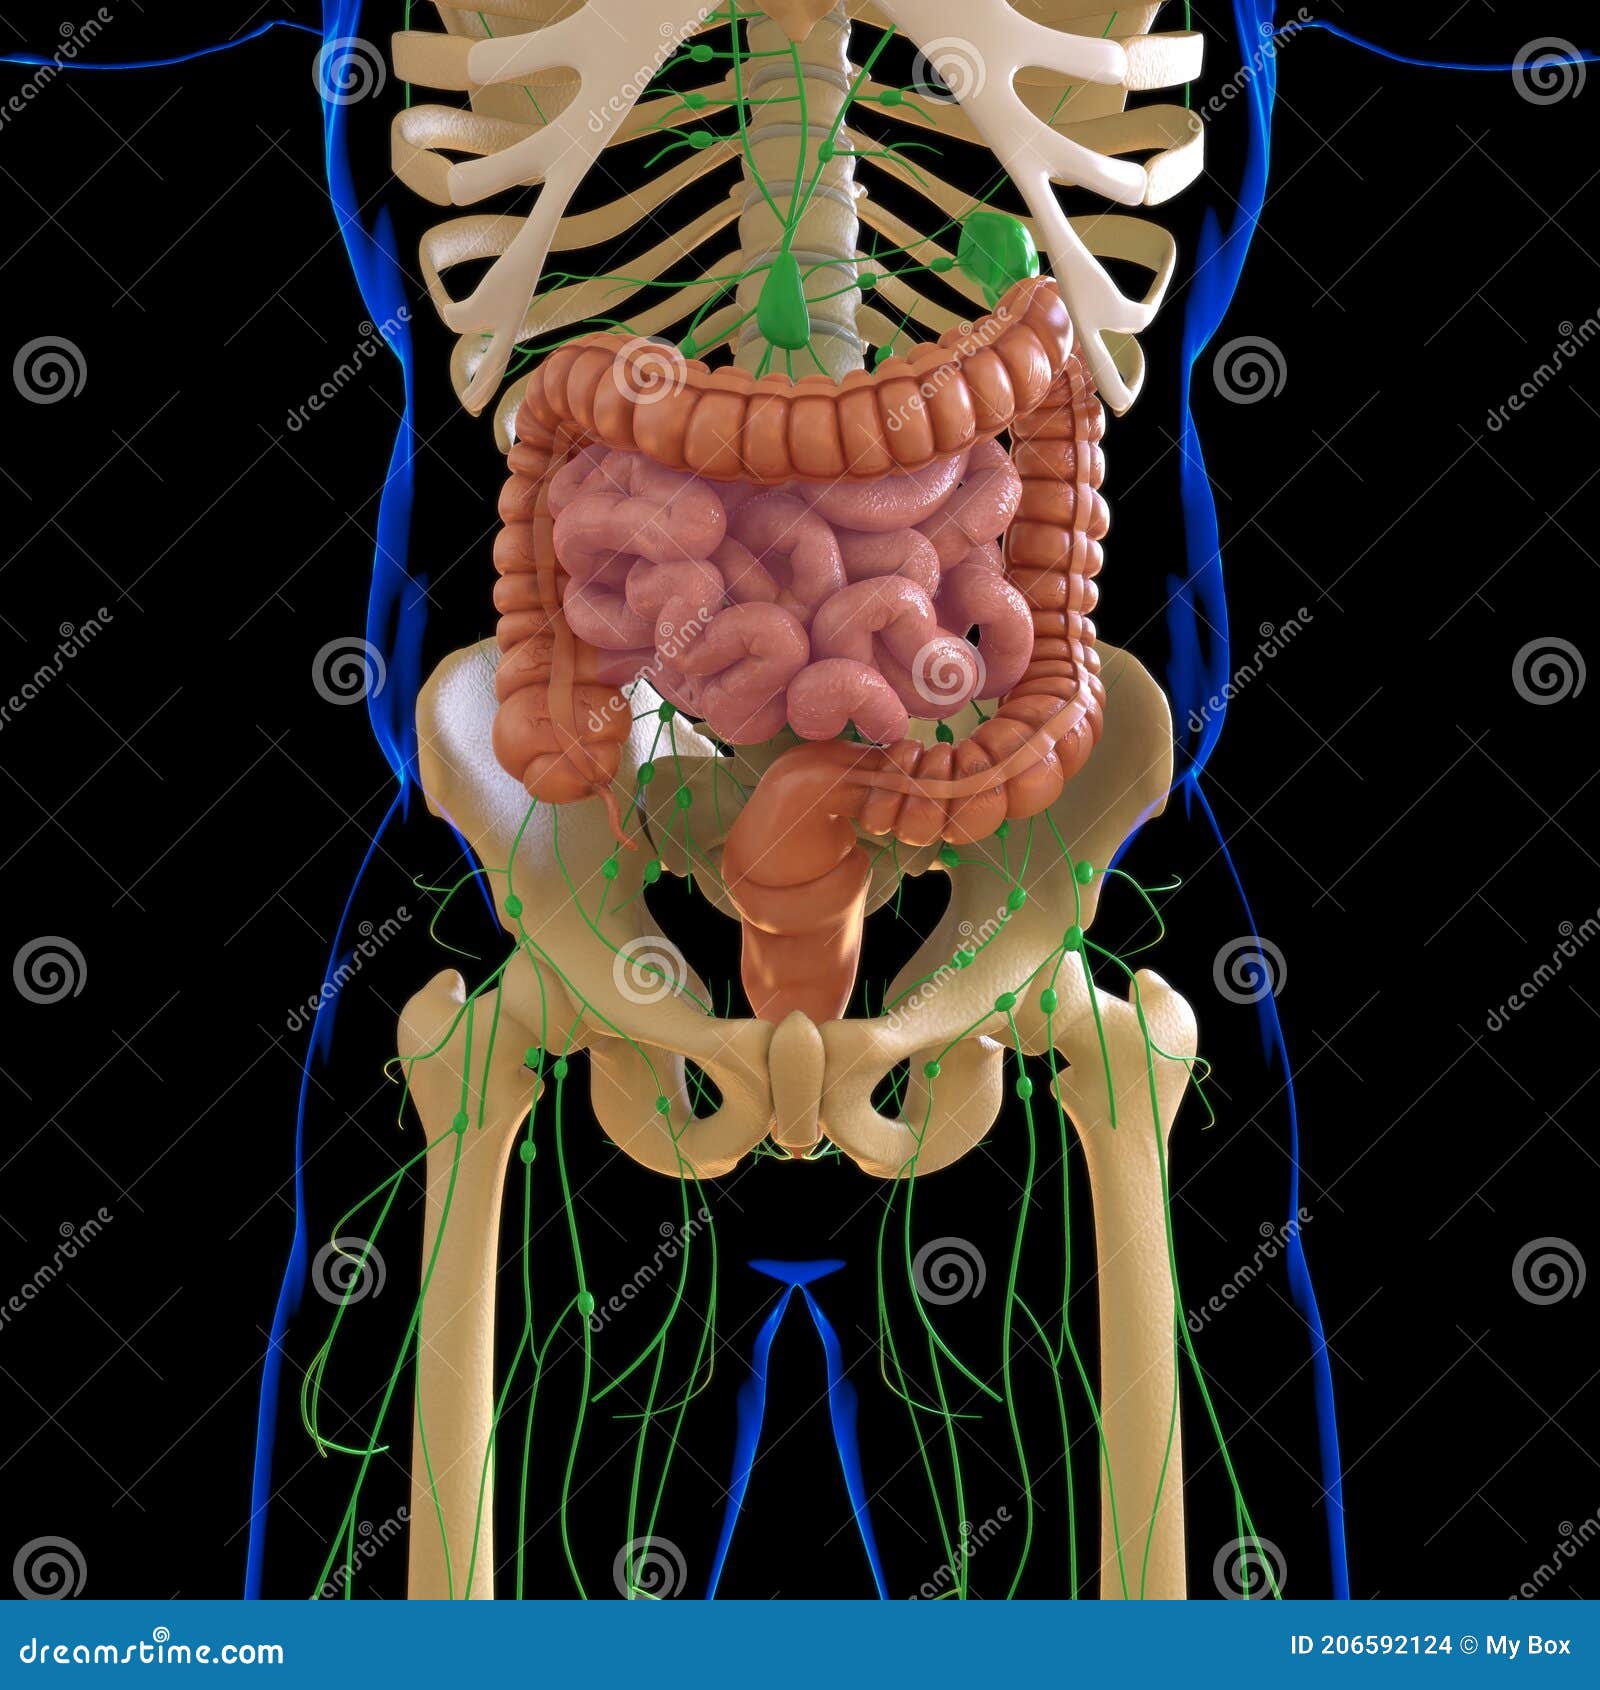 The Large Intestine: Anatomy and 3D Illustrations